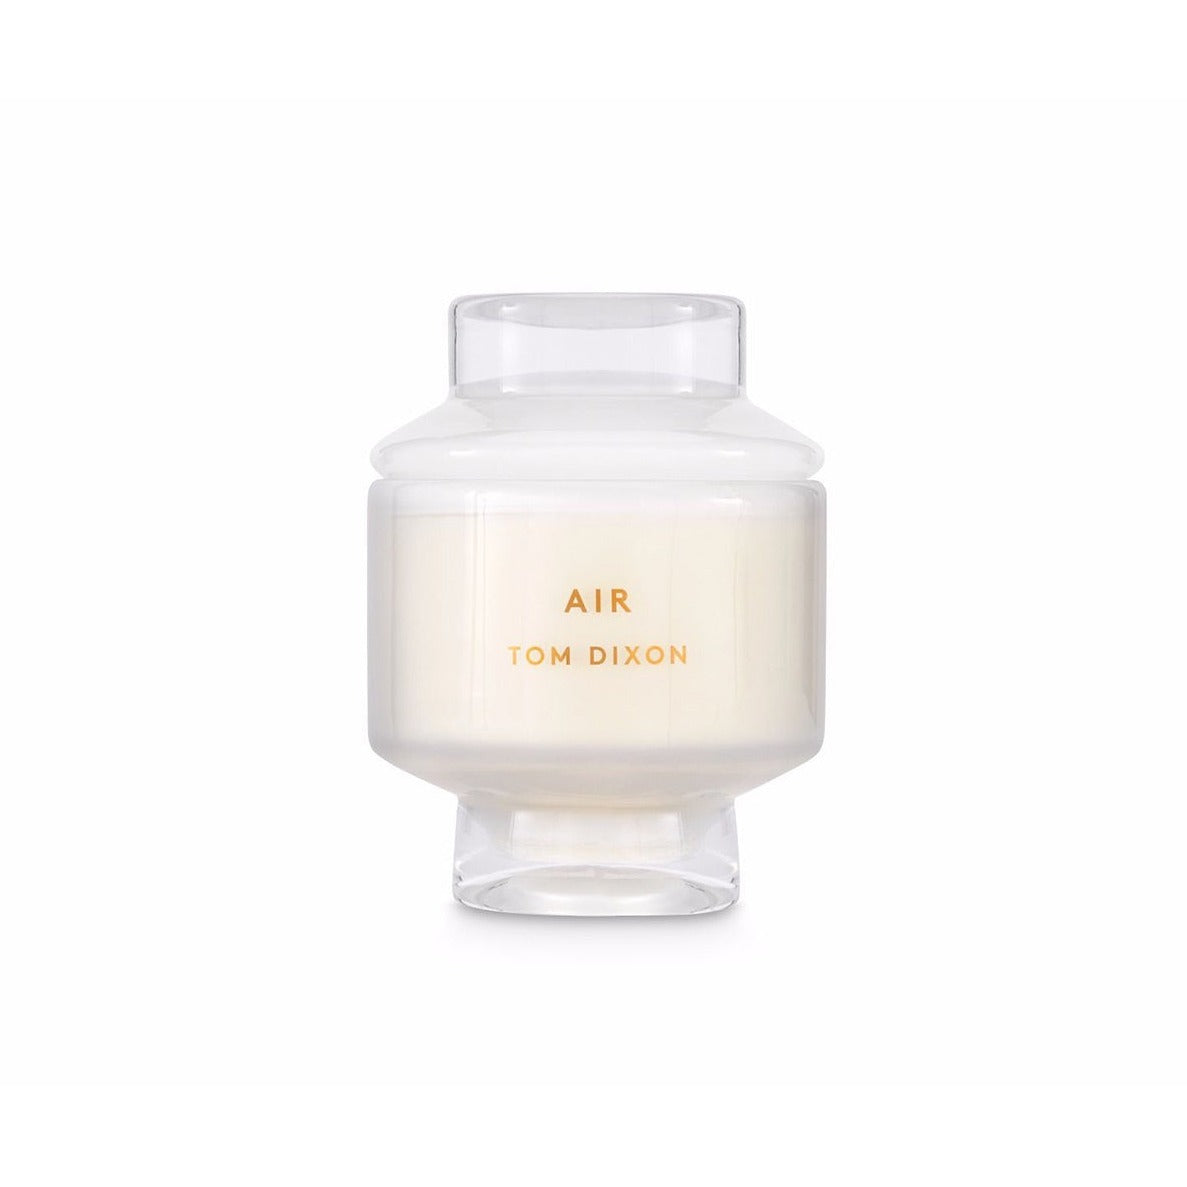 Elements Candle Air - Large